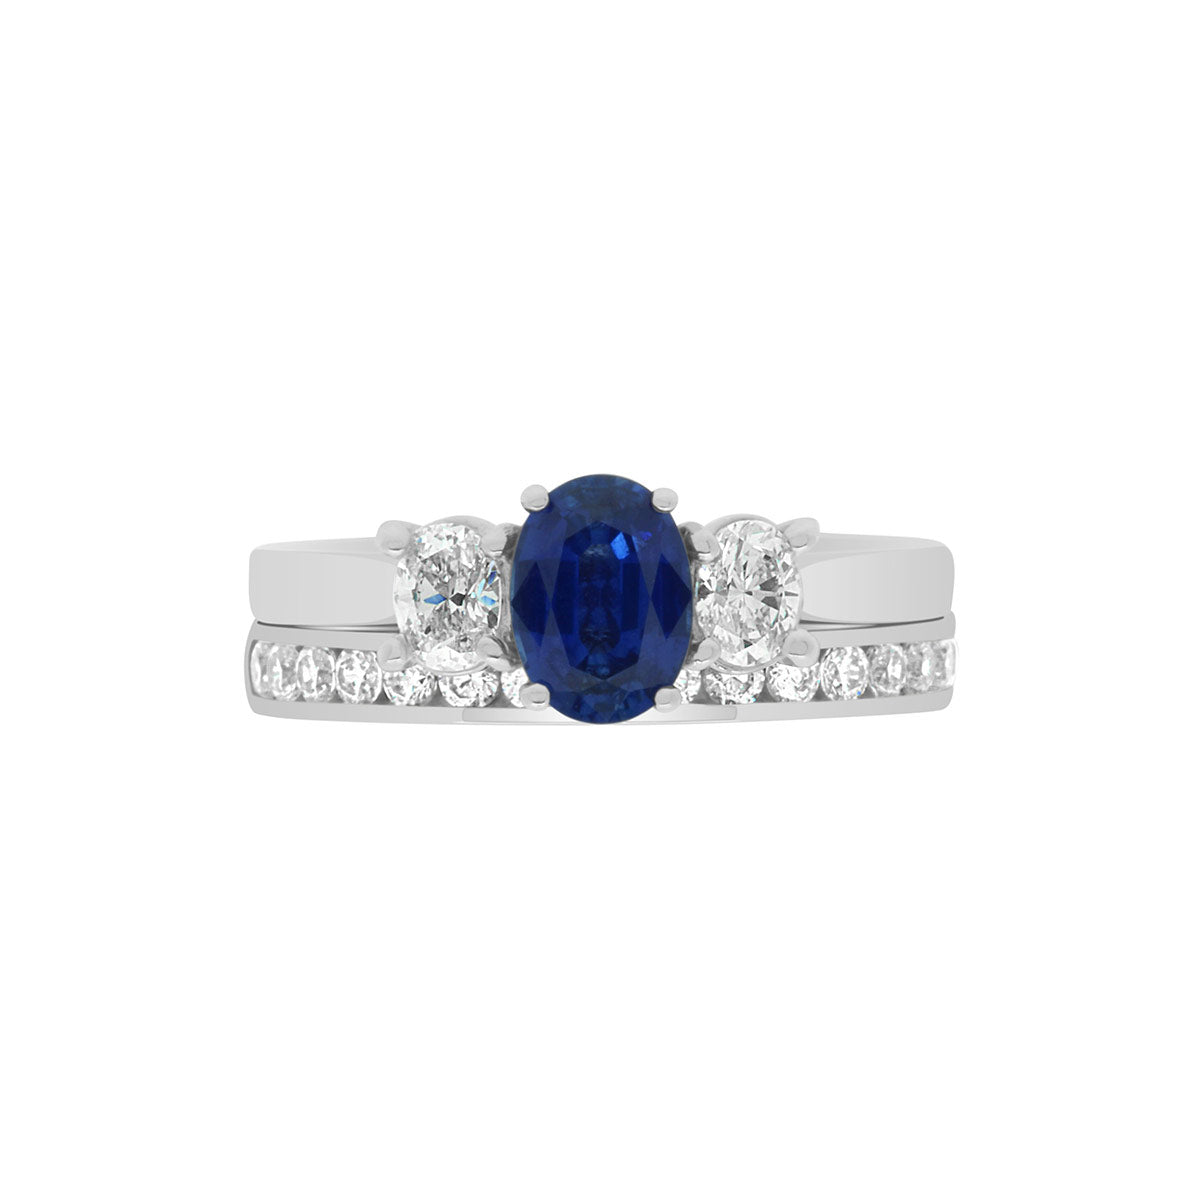 Sapphire &amp; Diamond Trilogy Ring made from platinum with a matching diamond set wedding ring